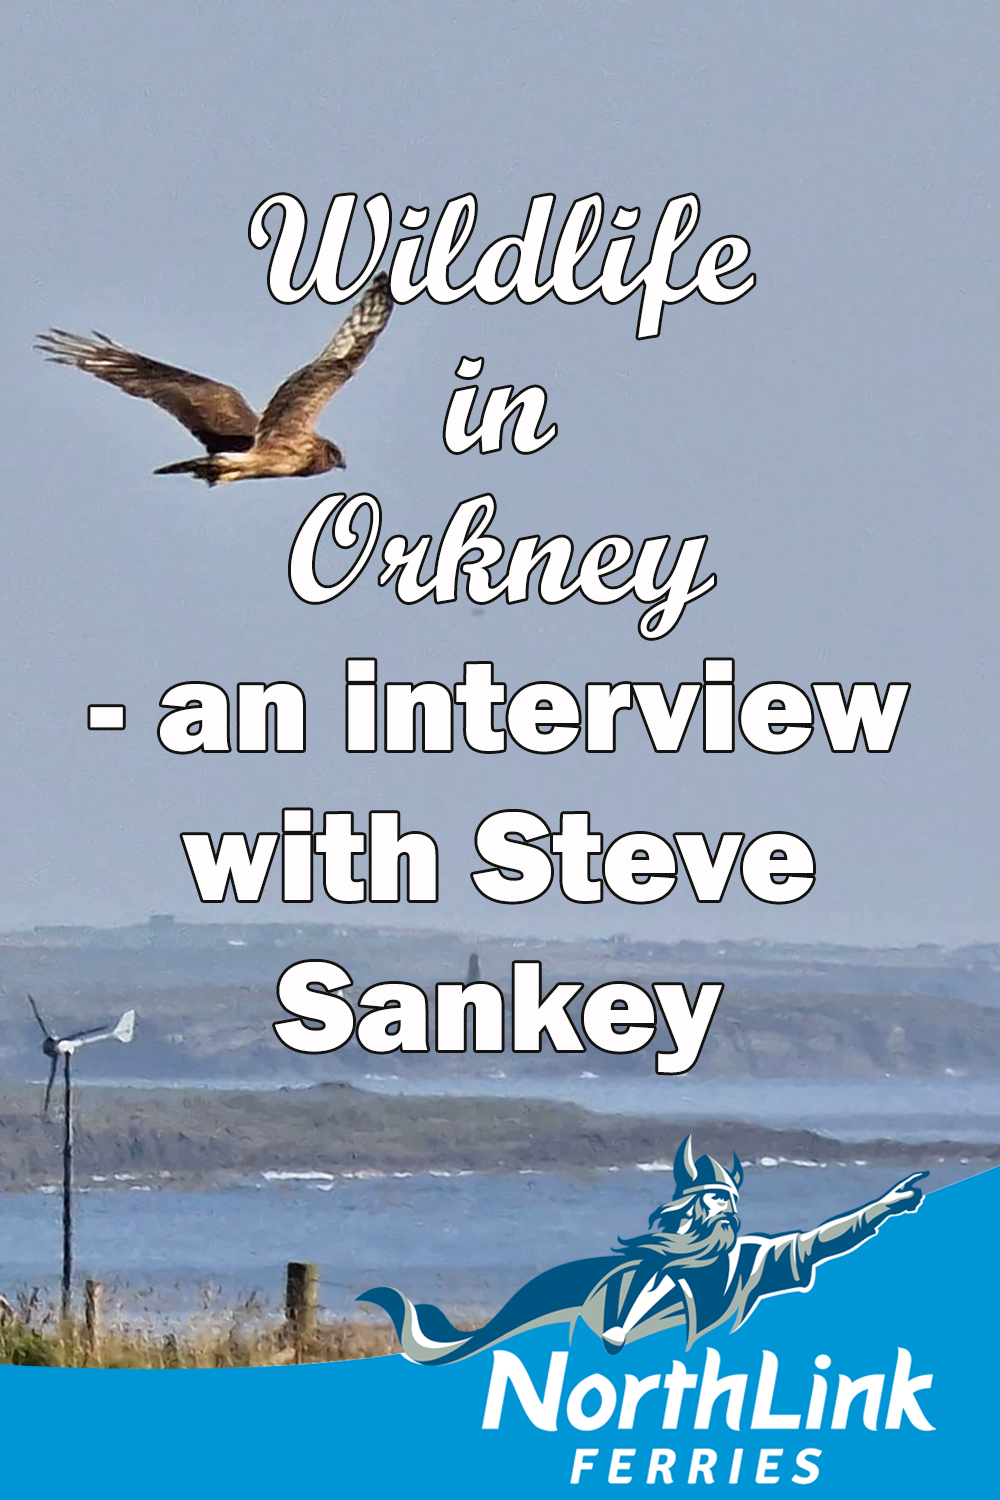 Wildlife in Orkney - an interview with Steve Sankey